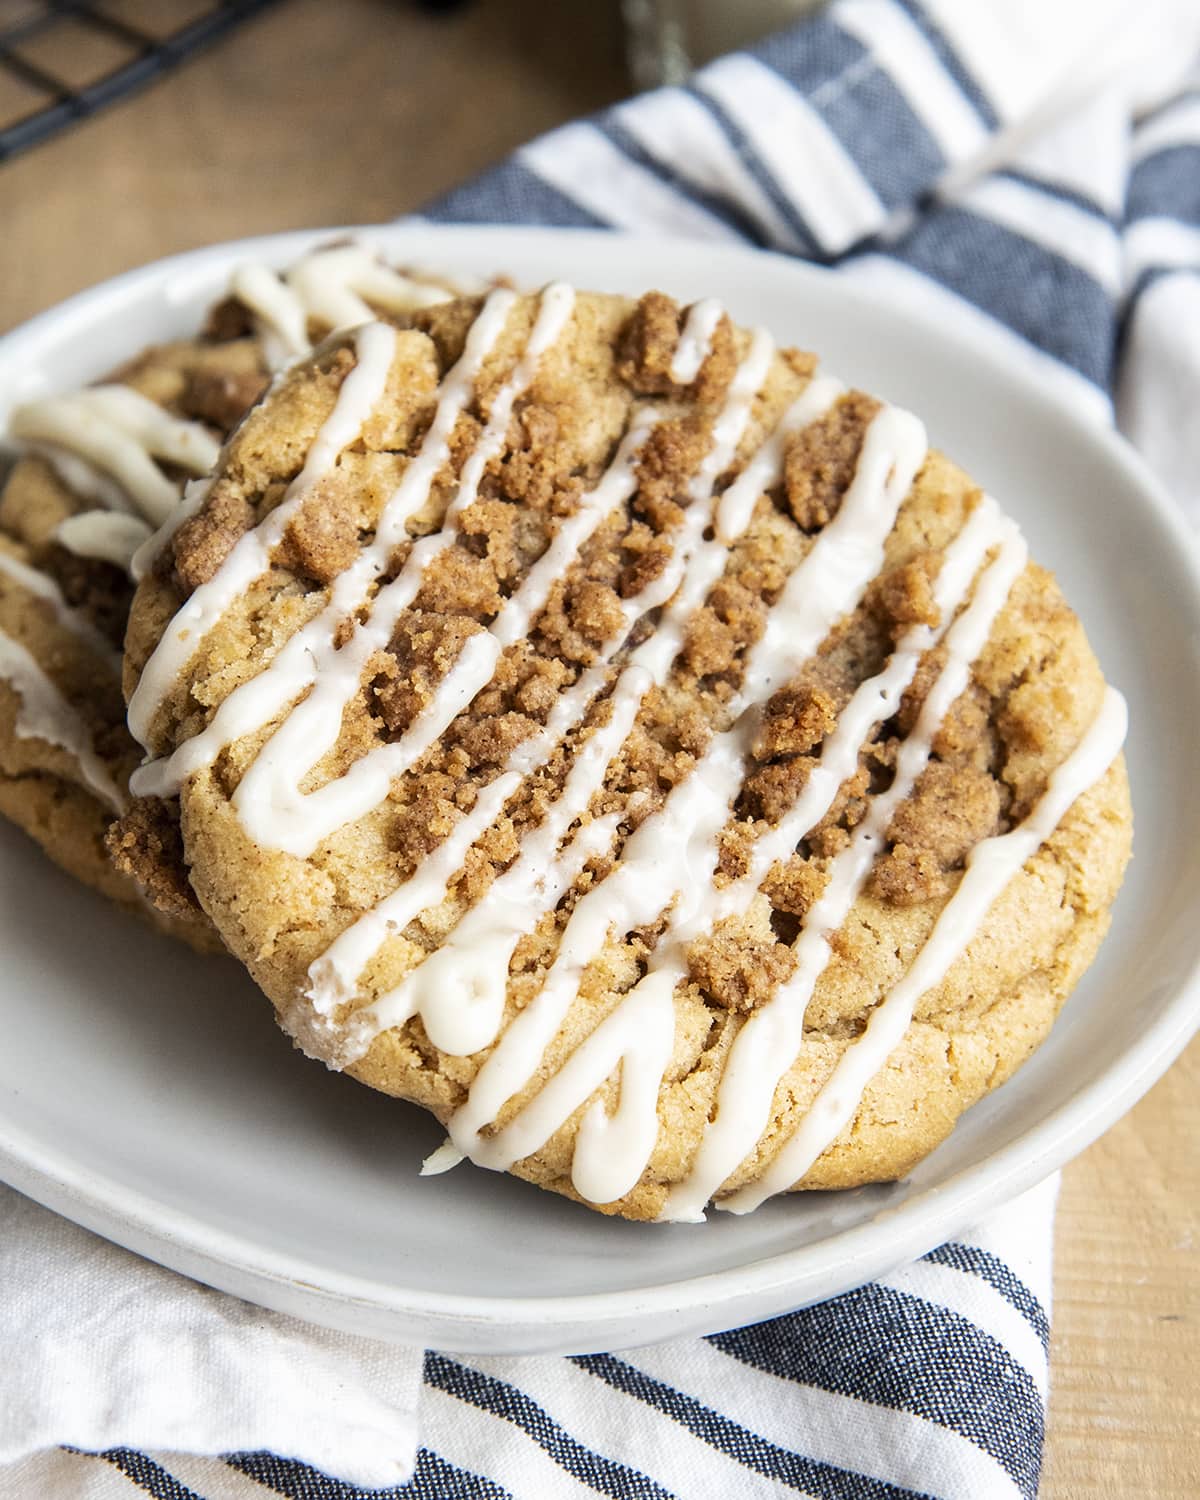 Two giant coffee cake flavored cookies on a white plate.